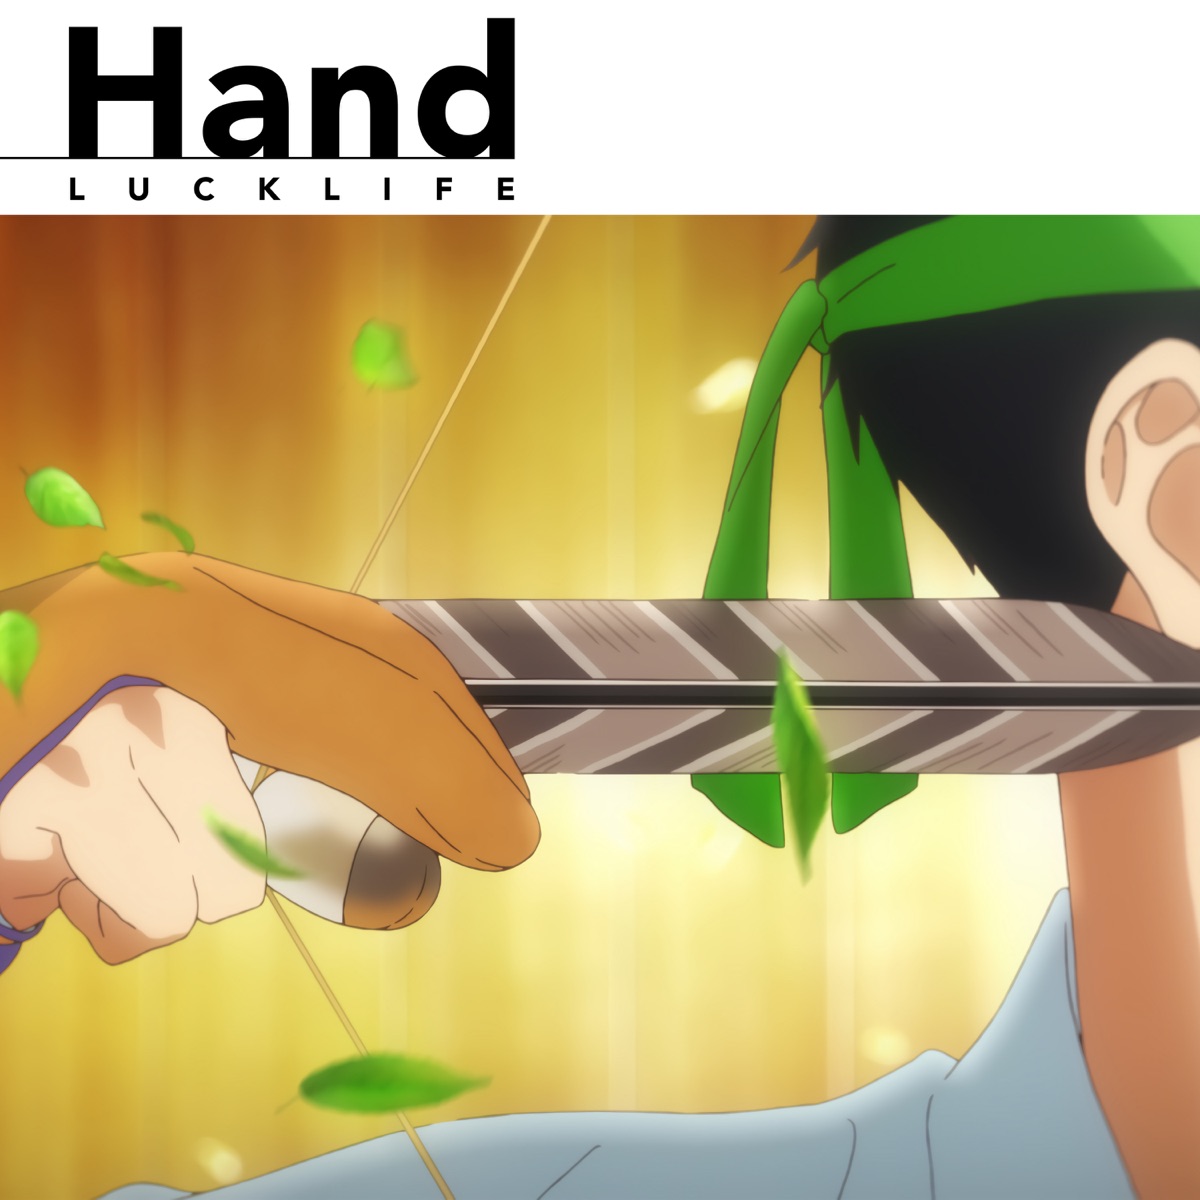 Cover art for『Luck Life - Hand』from the release『Hand